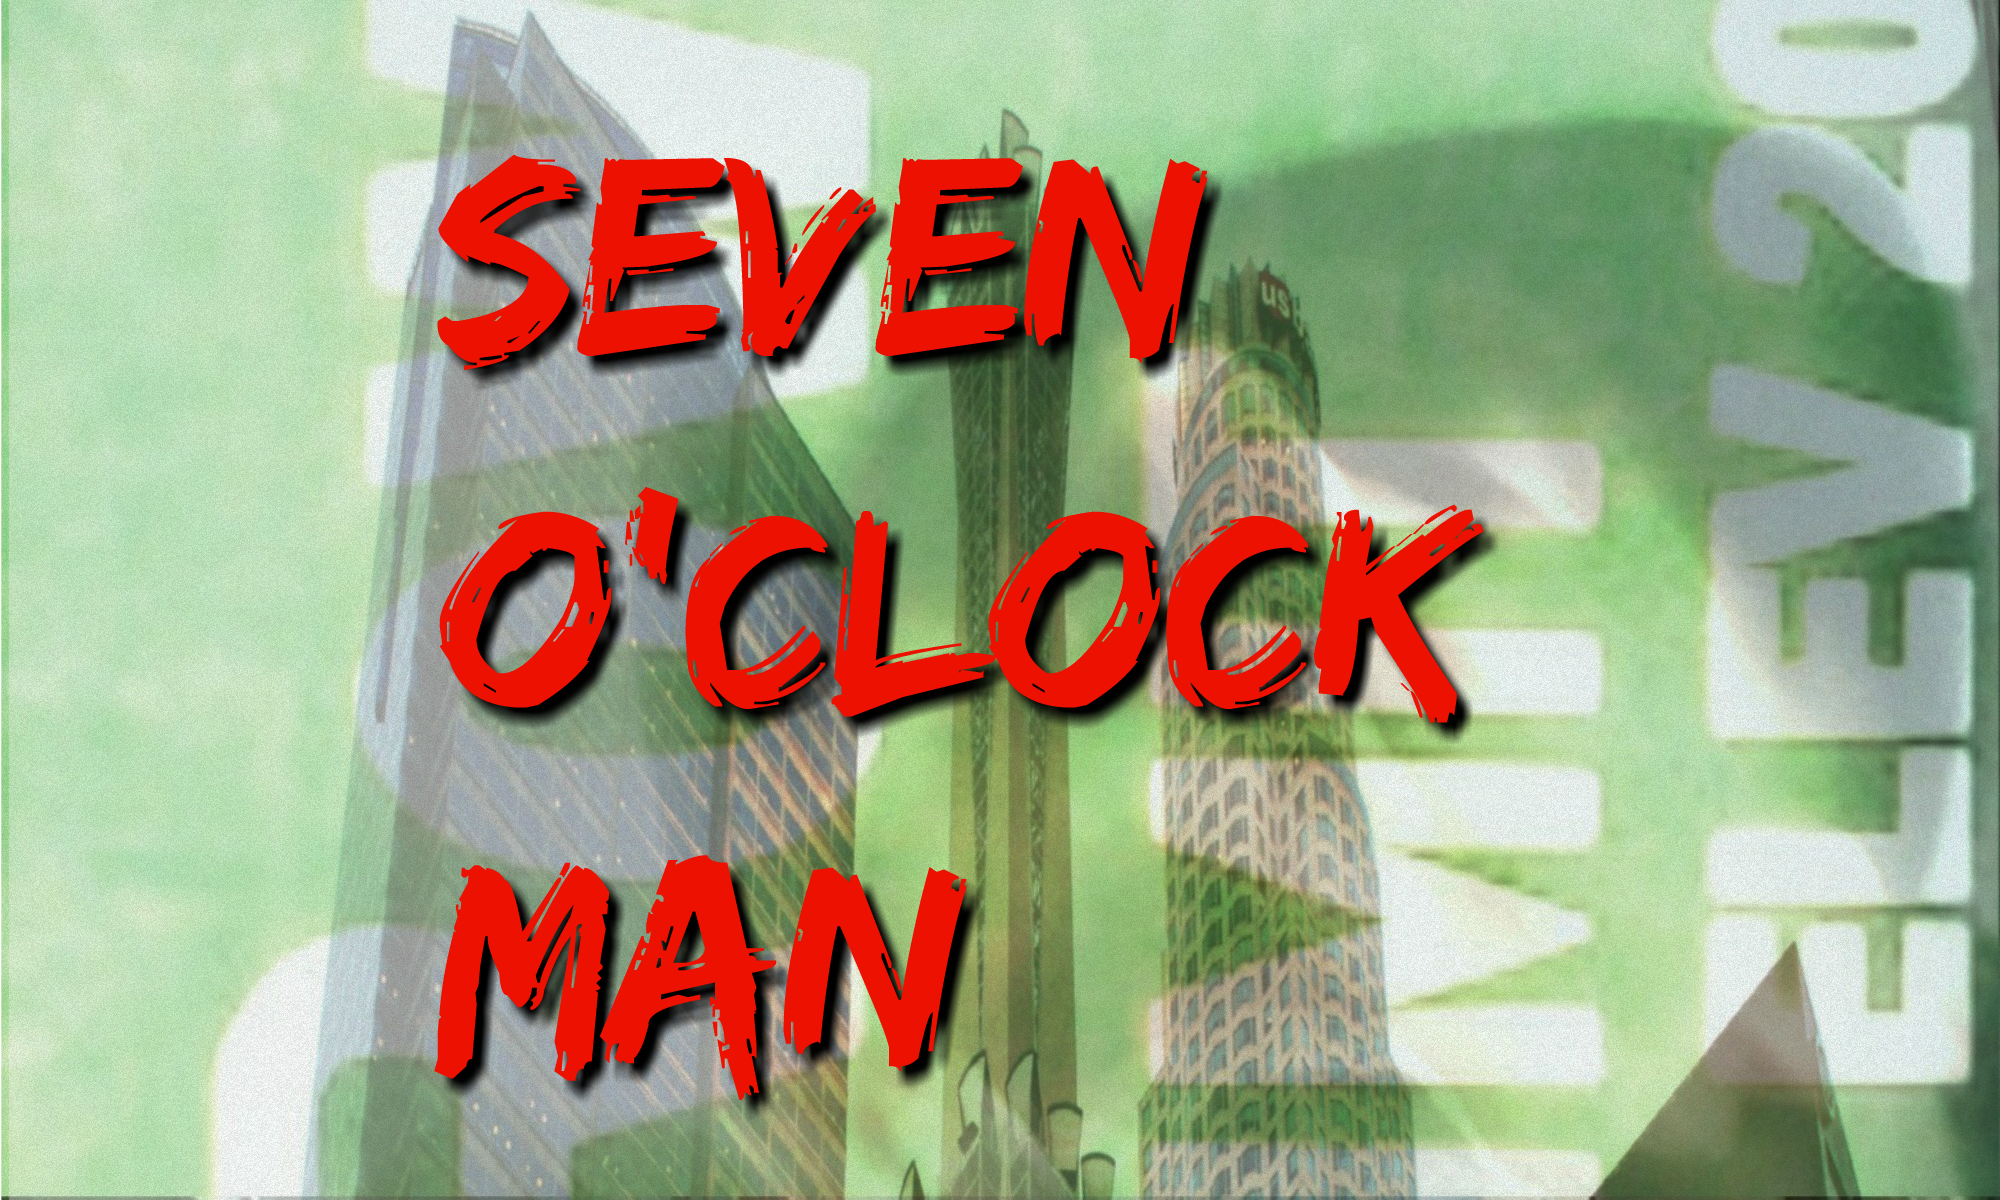 Judges Weigh In on Seven o’Clock Man